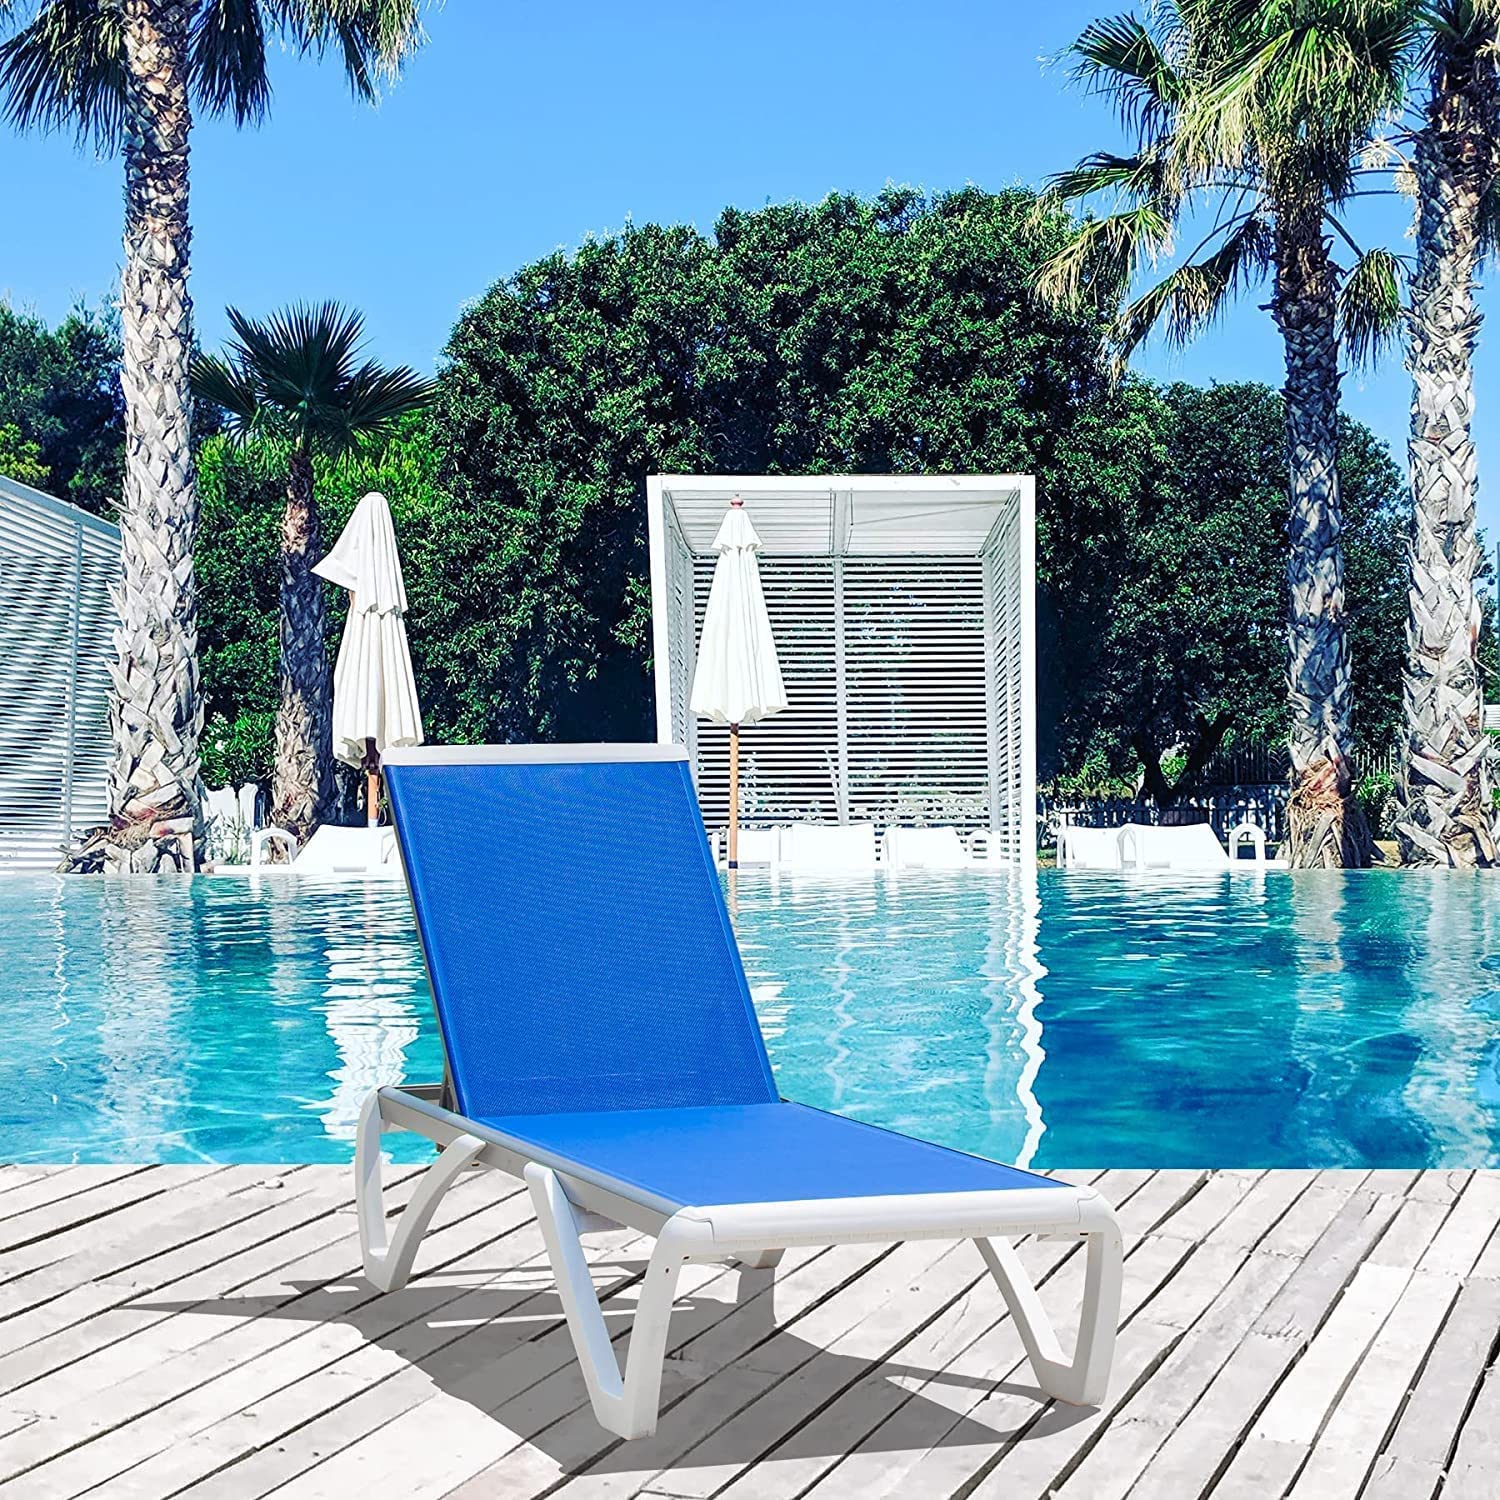 Domi Outdoor Living Chaise Lounge Chair Aluminum Adjustable Pool Lounge Chair，With All-Weather Textilene for Deck, Lawn, Backyard （1 Blue Chair） - image 1 of 8